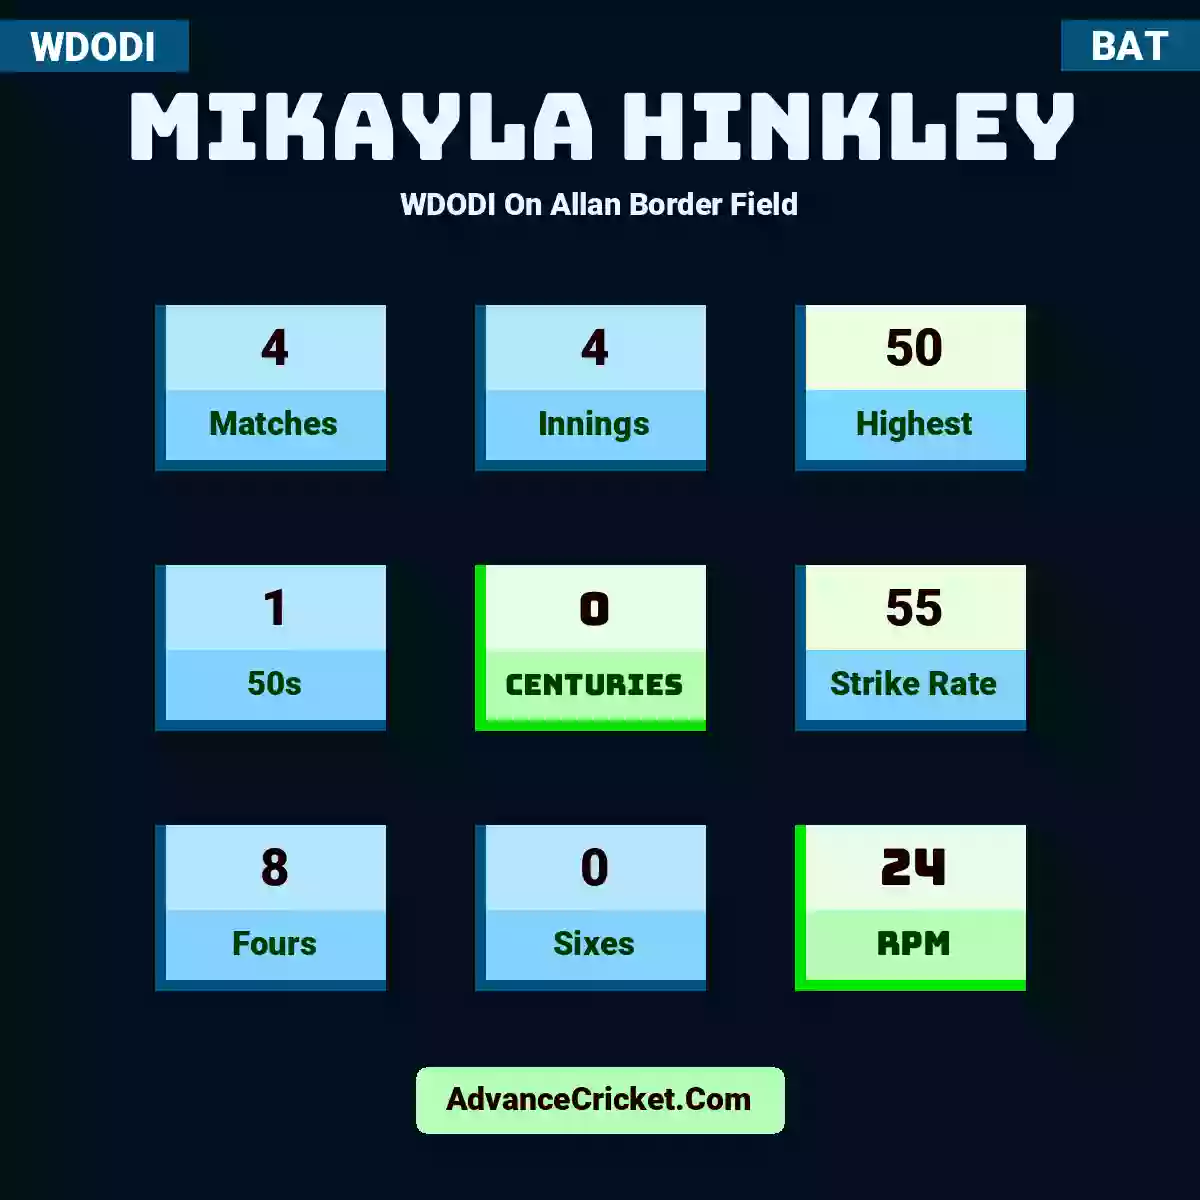 Mikayla Hinkley WDODI  On Allan Border Field, Mikayla Hinkley played 4 matches, scored 50 runs as highest, 1 half-centuries, and 0 centuries, with a strike rate of 55. M.Hinkley hit 8 fours and 0 sixes, with an RPM of 24.